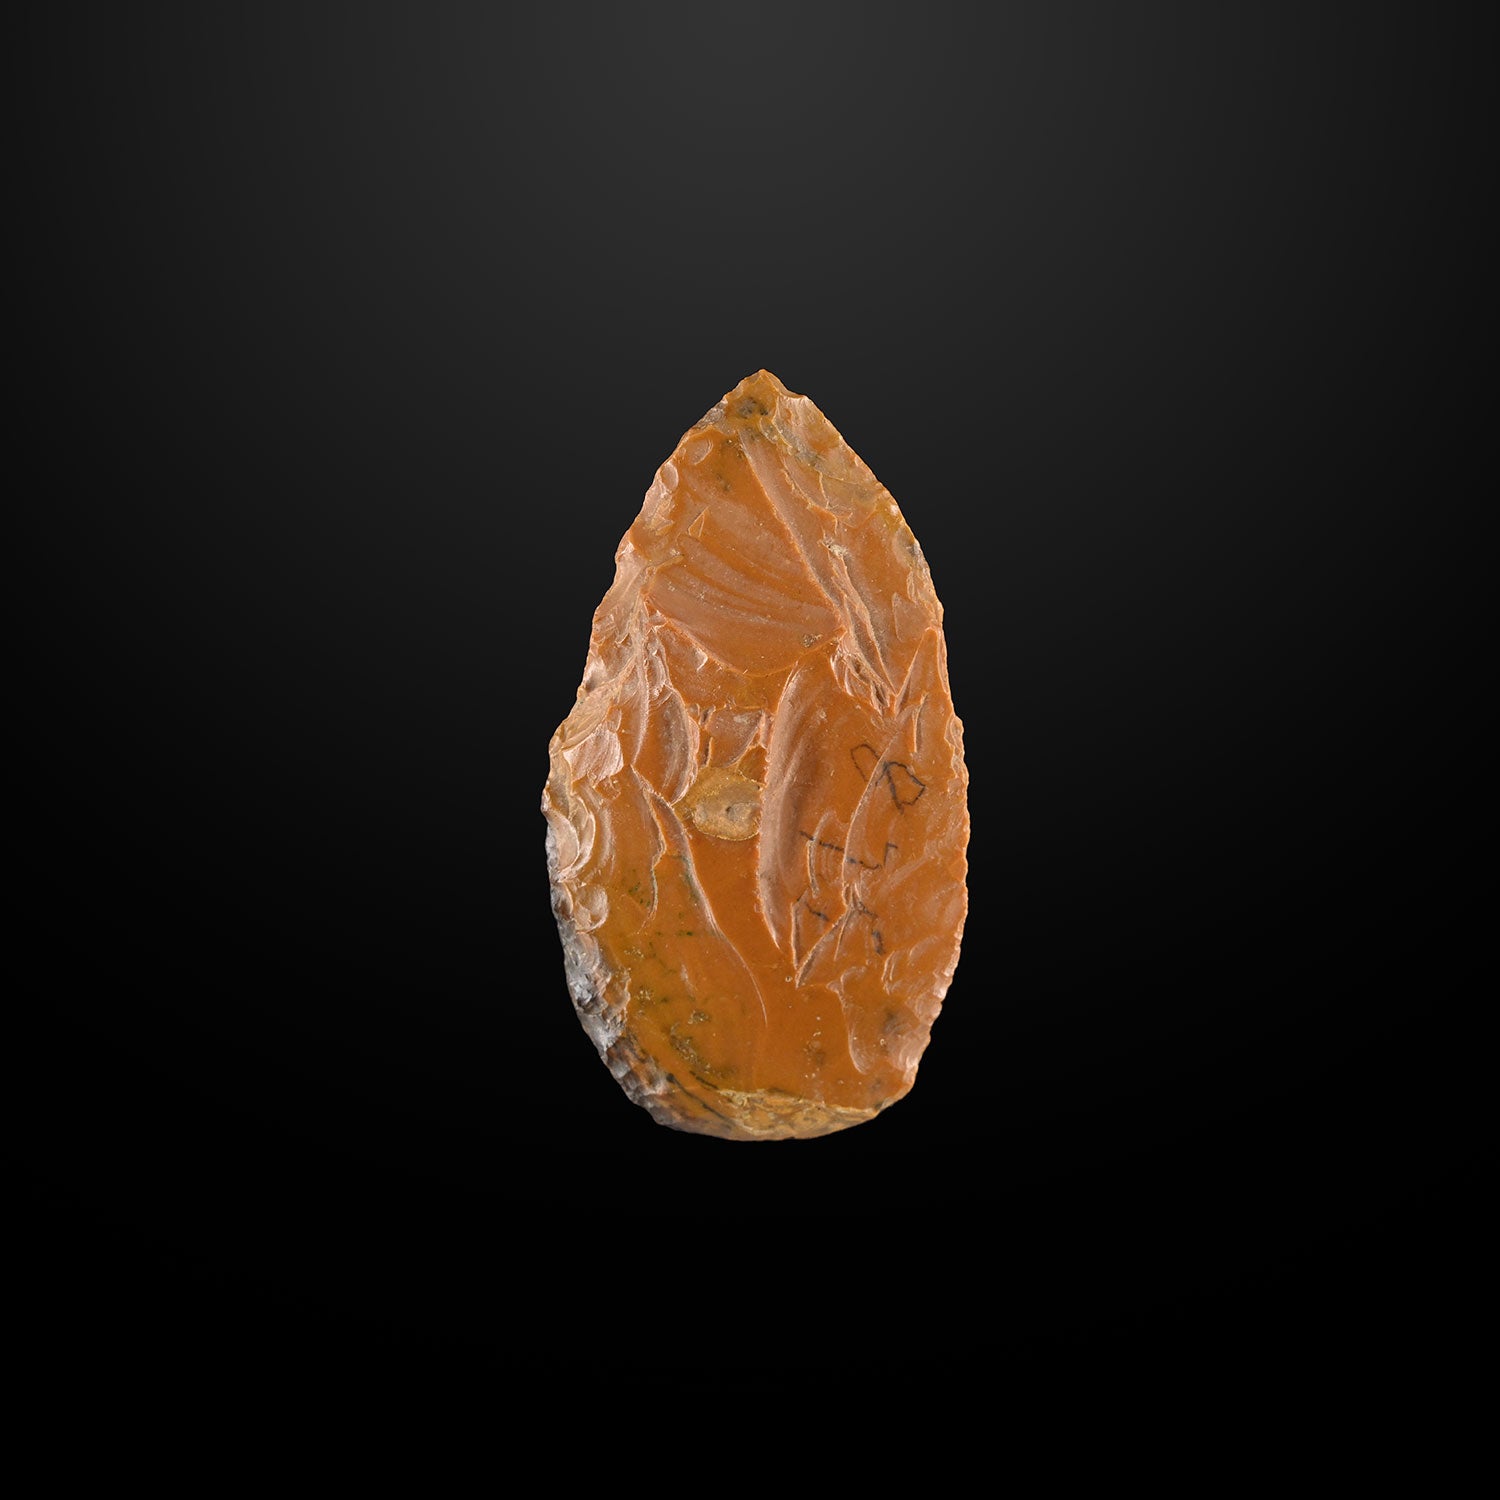 A Published Egyptian Flint Spearhead from the Thebaid, <br><em>Neolithic - Pre Dynastic Period, ca. 7500 - 3700 BCE</em>